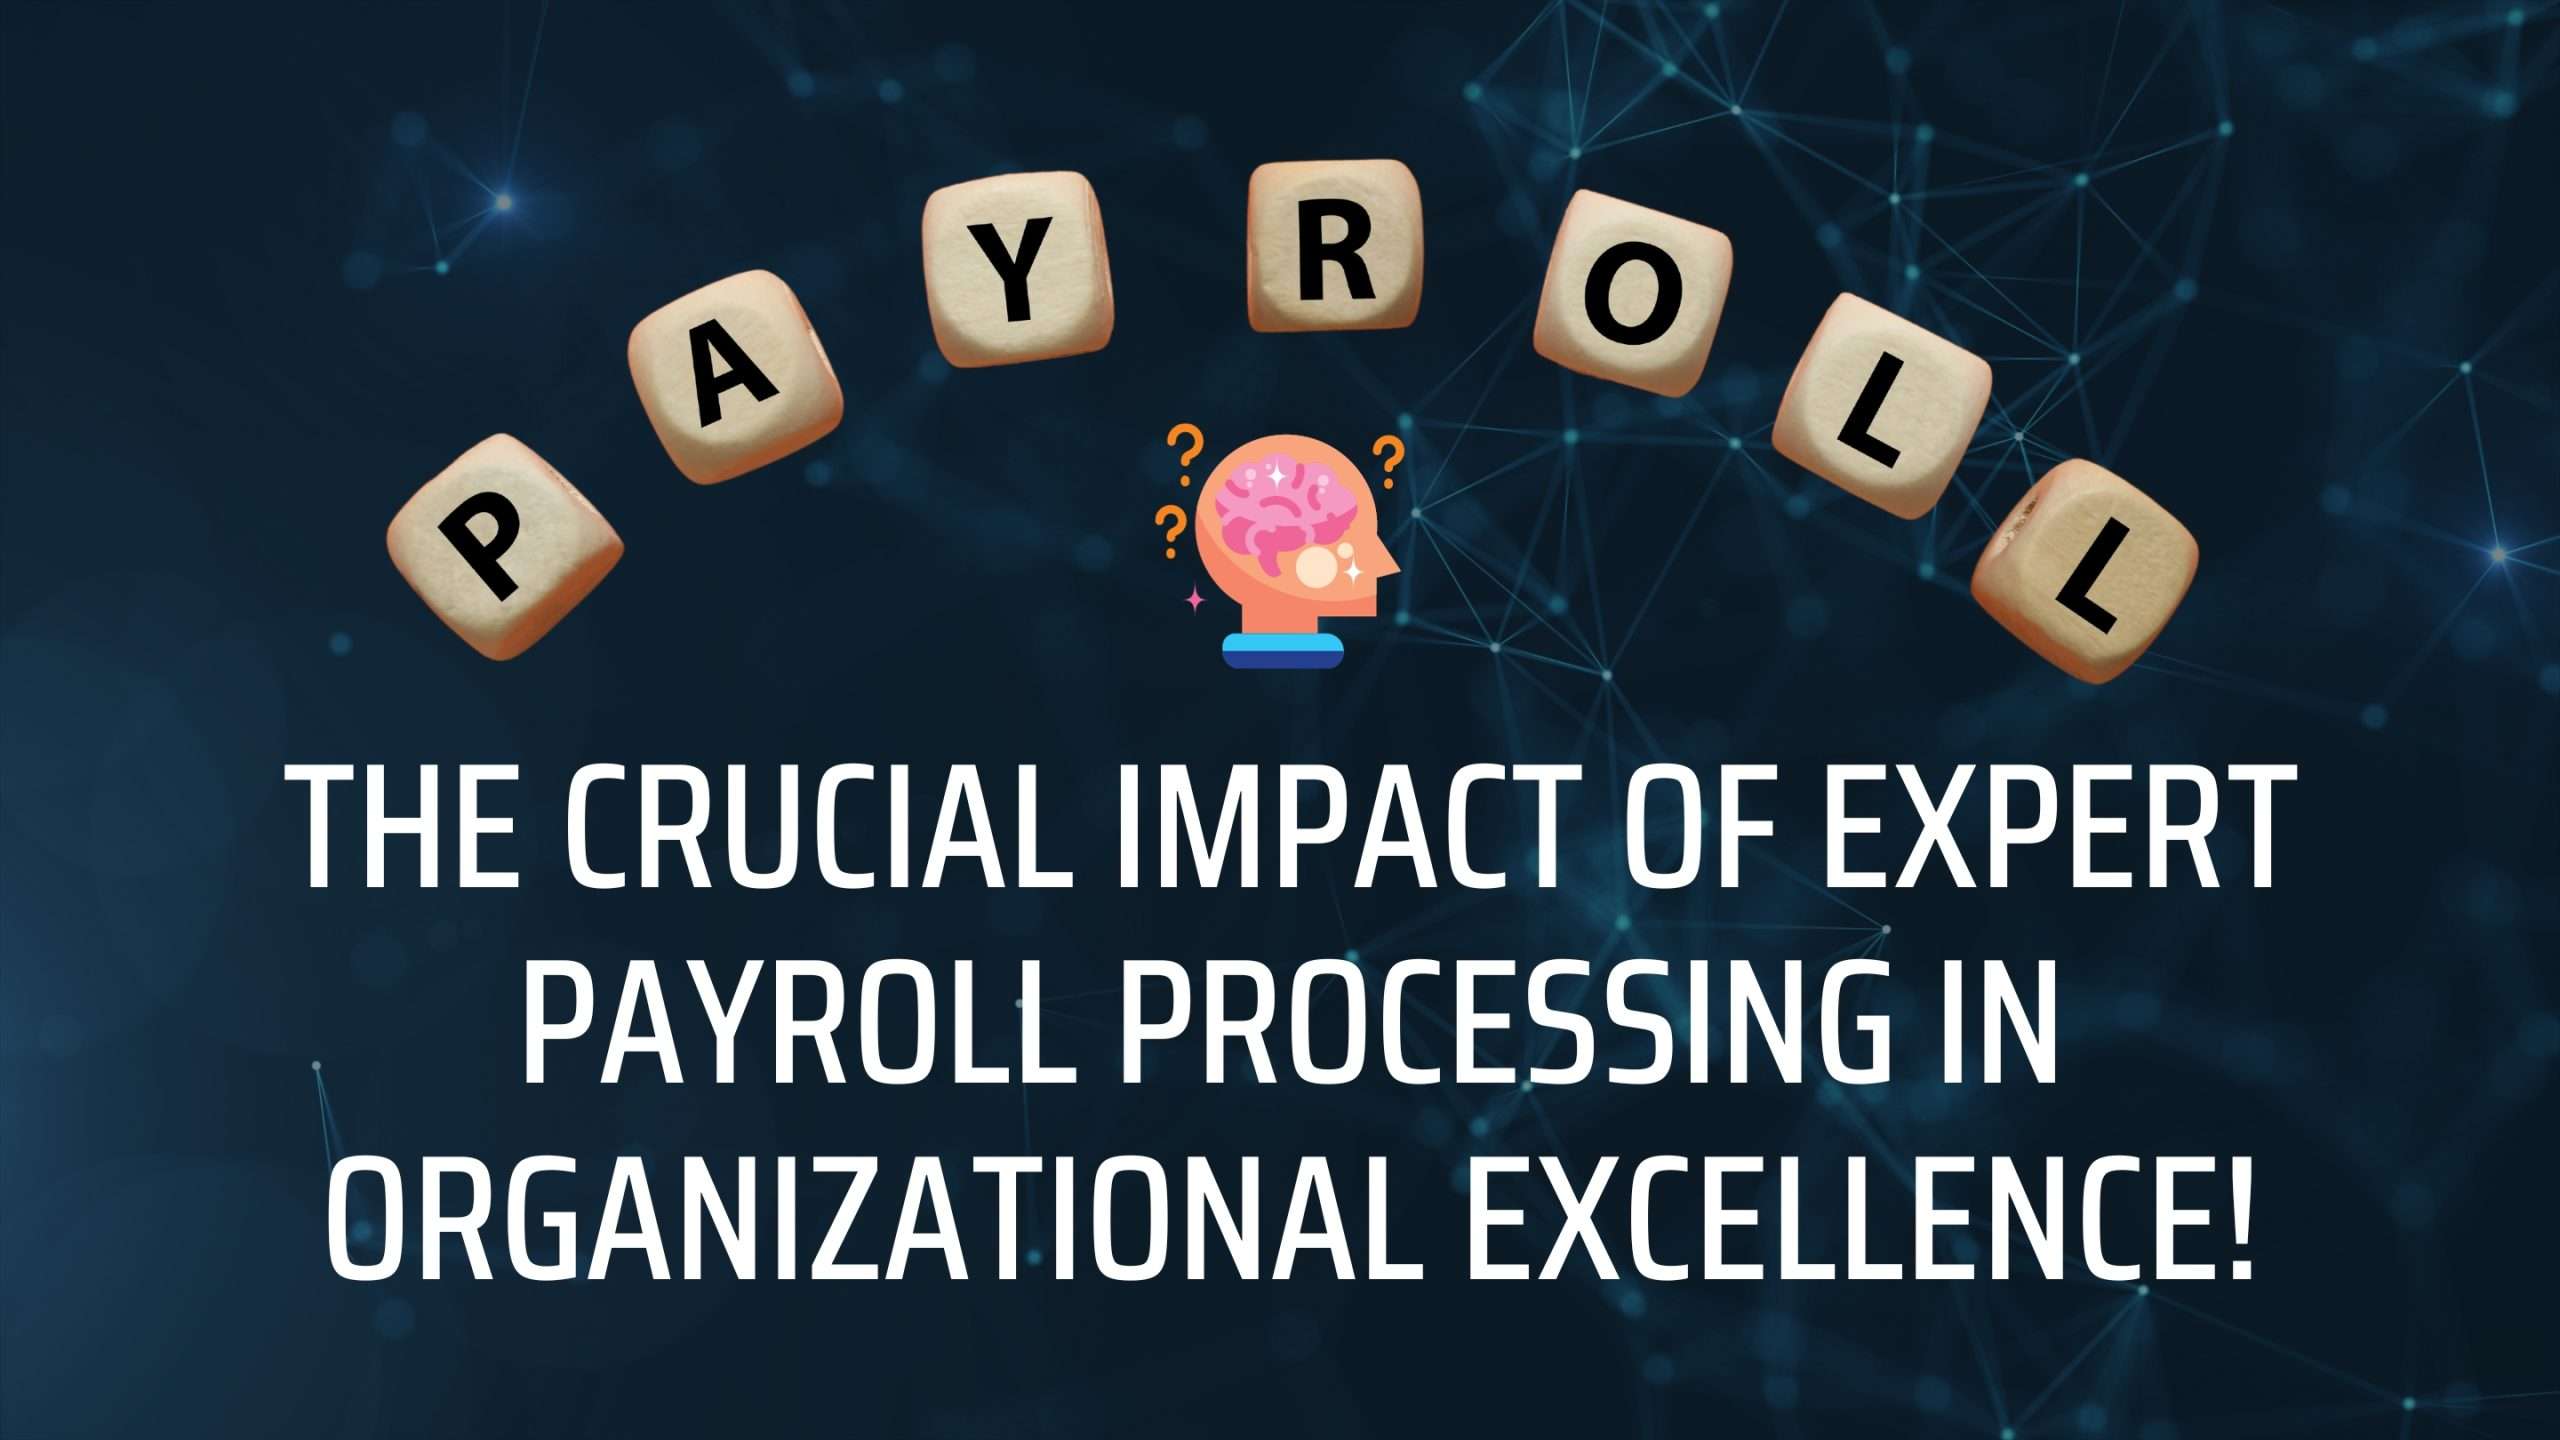 Why Professional Execution of Payroll Processing in the Organization is Critical?